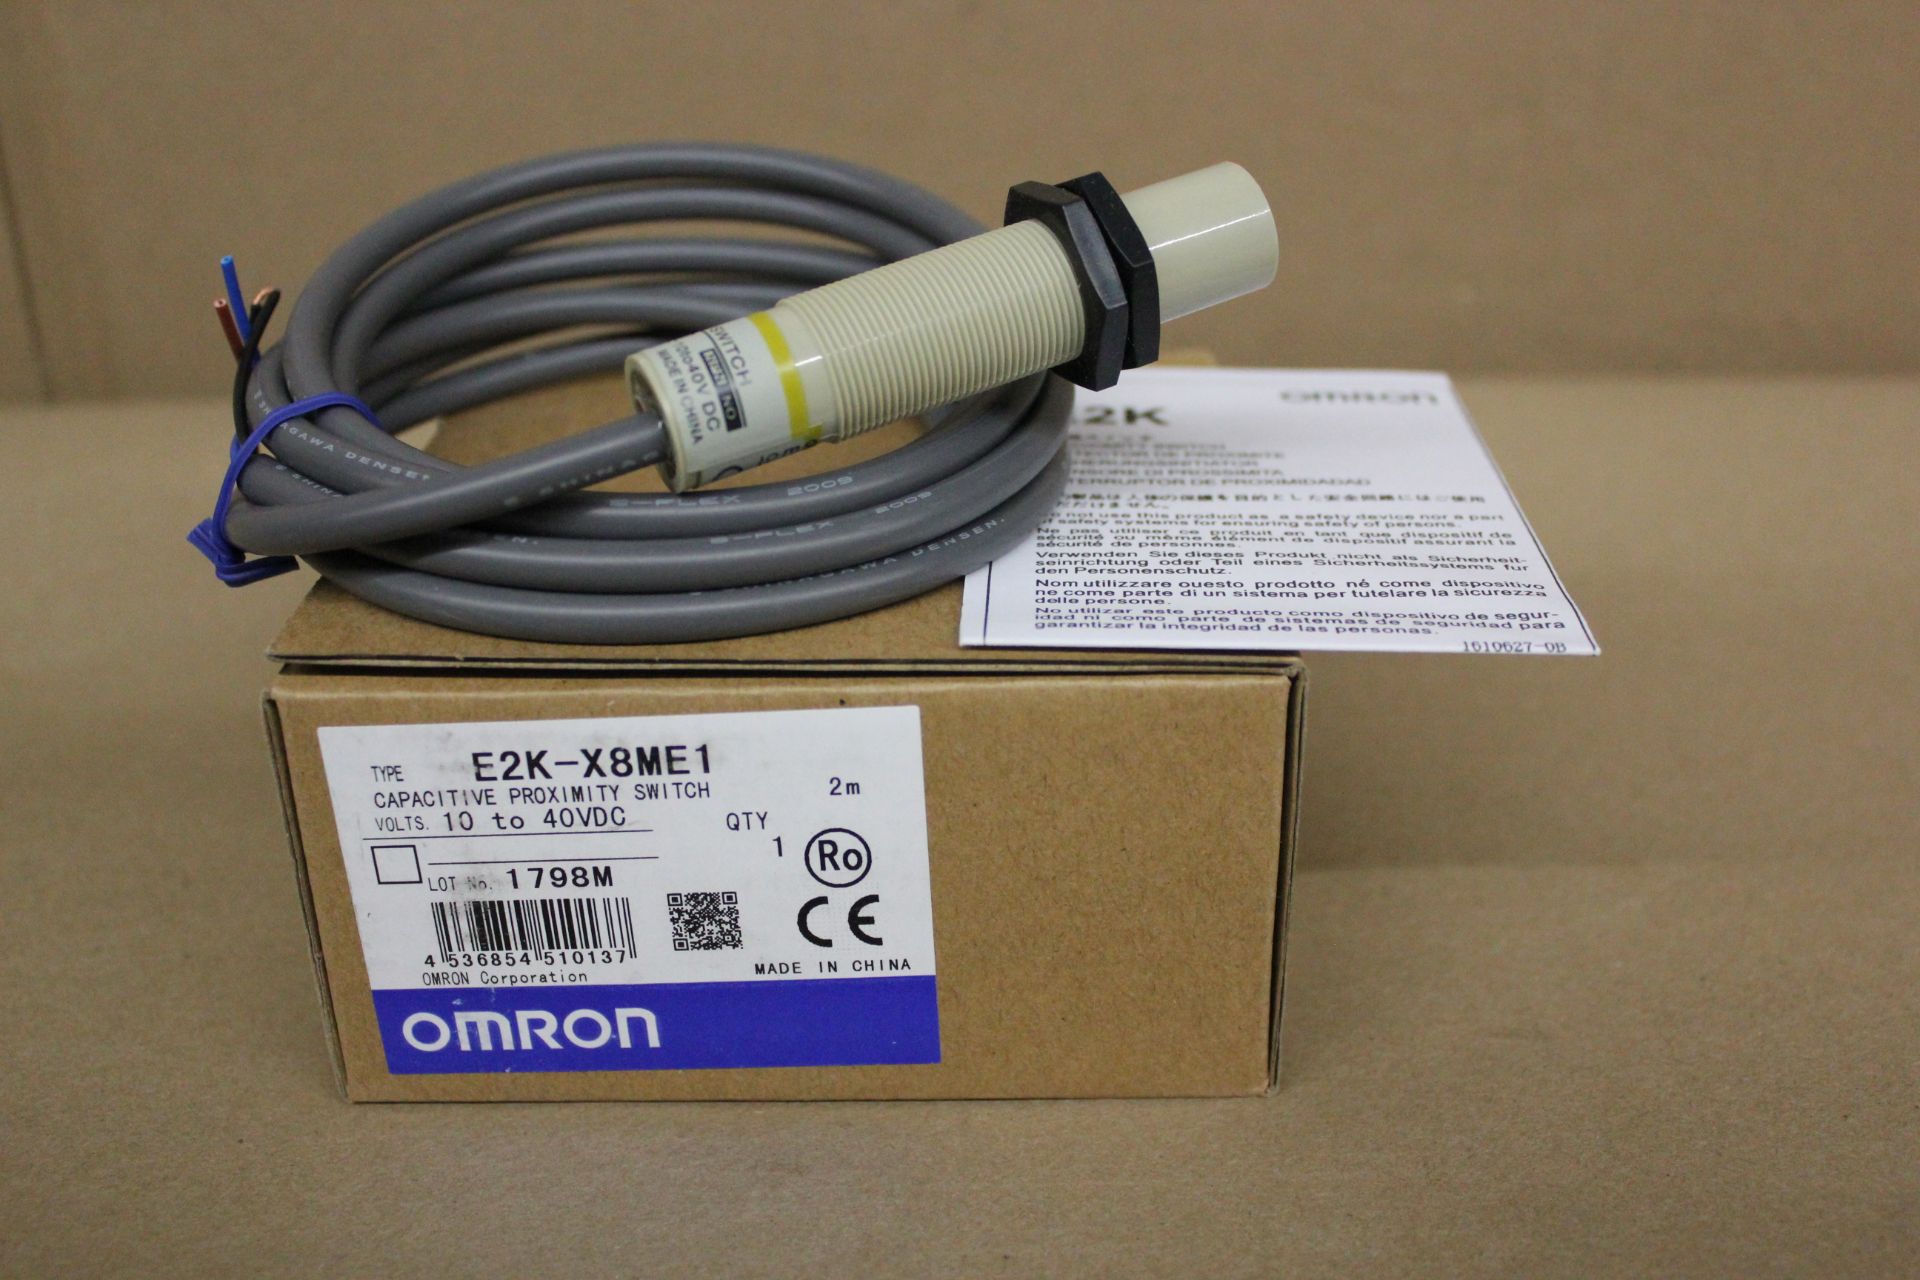 NEW OMRON CAPACITIVE PROXIMITY SWITCH